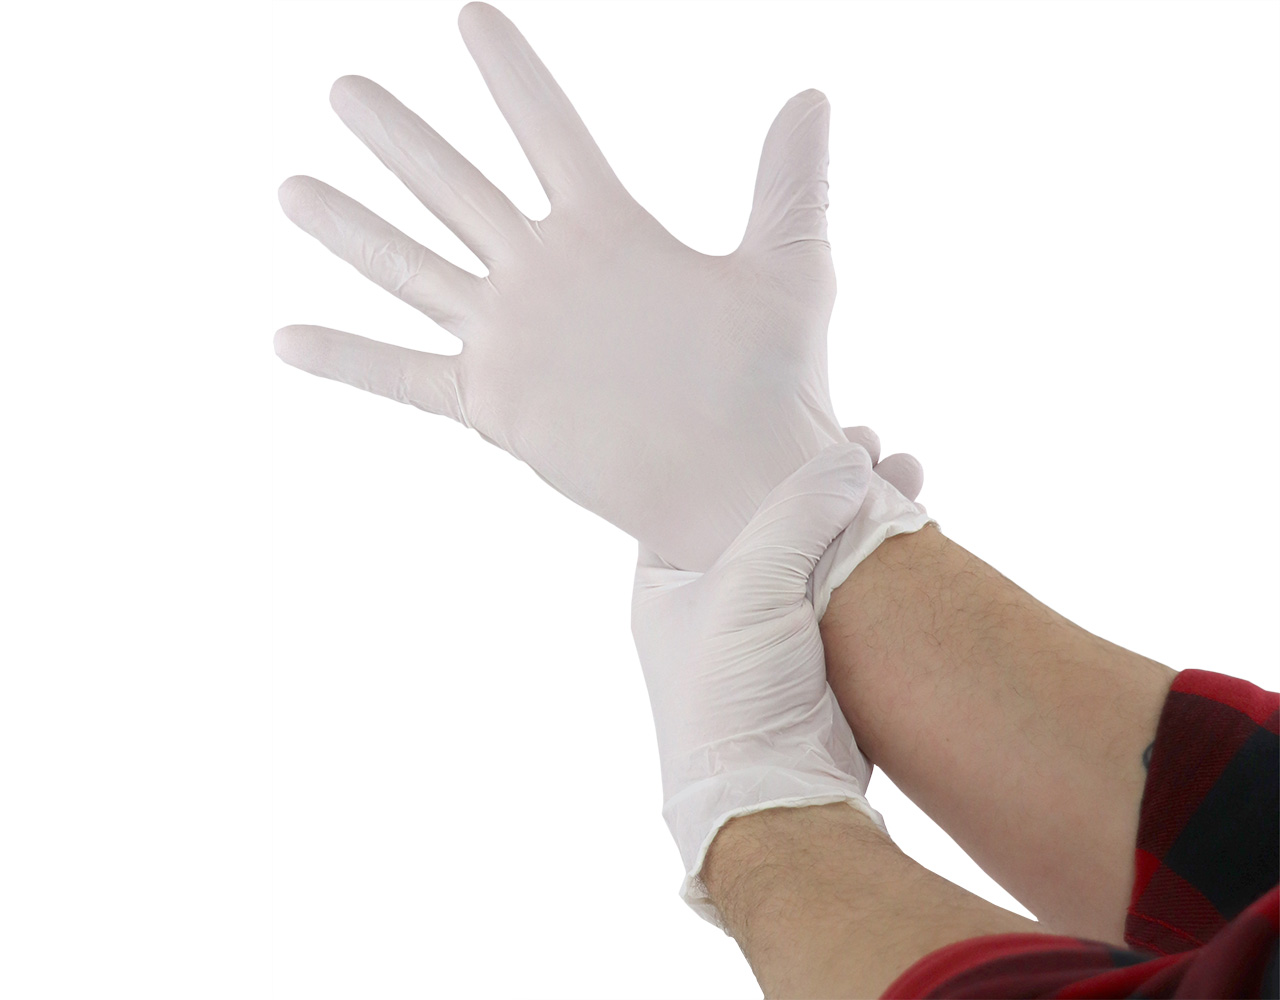 Picture for Mad Farmer White Nitrile Gloves, Size XL, Box of 100